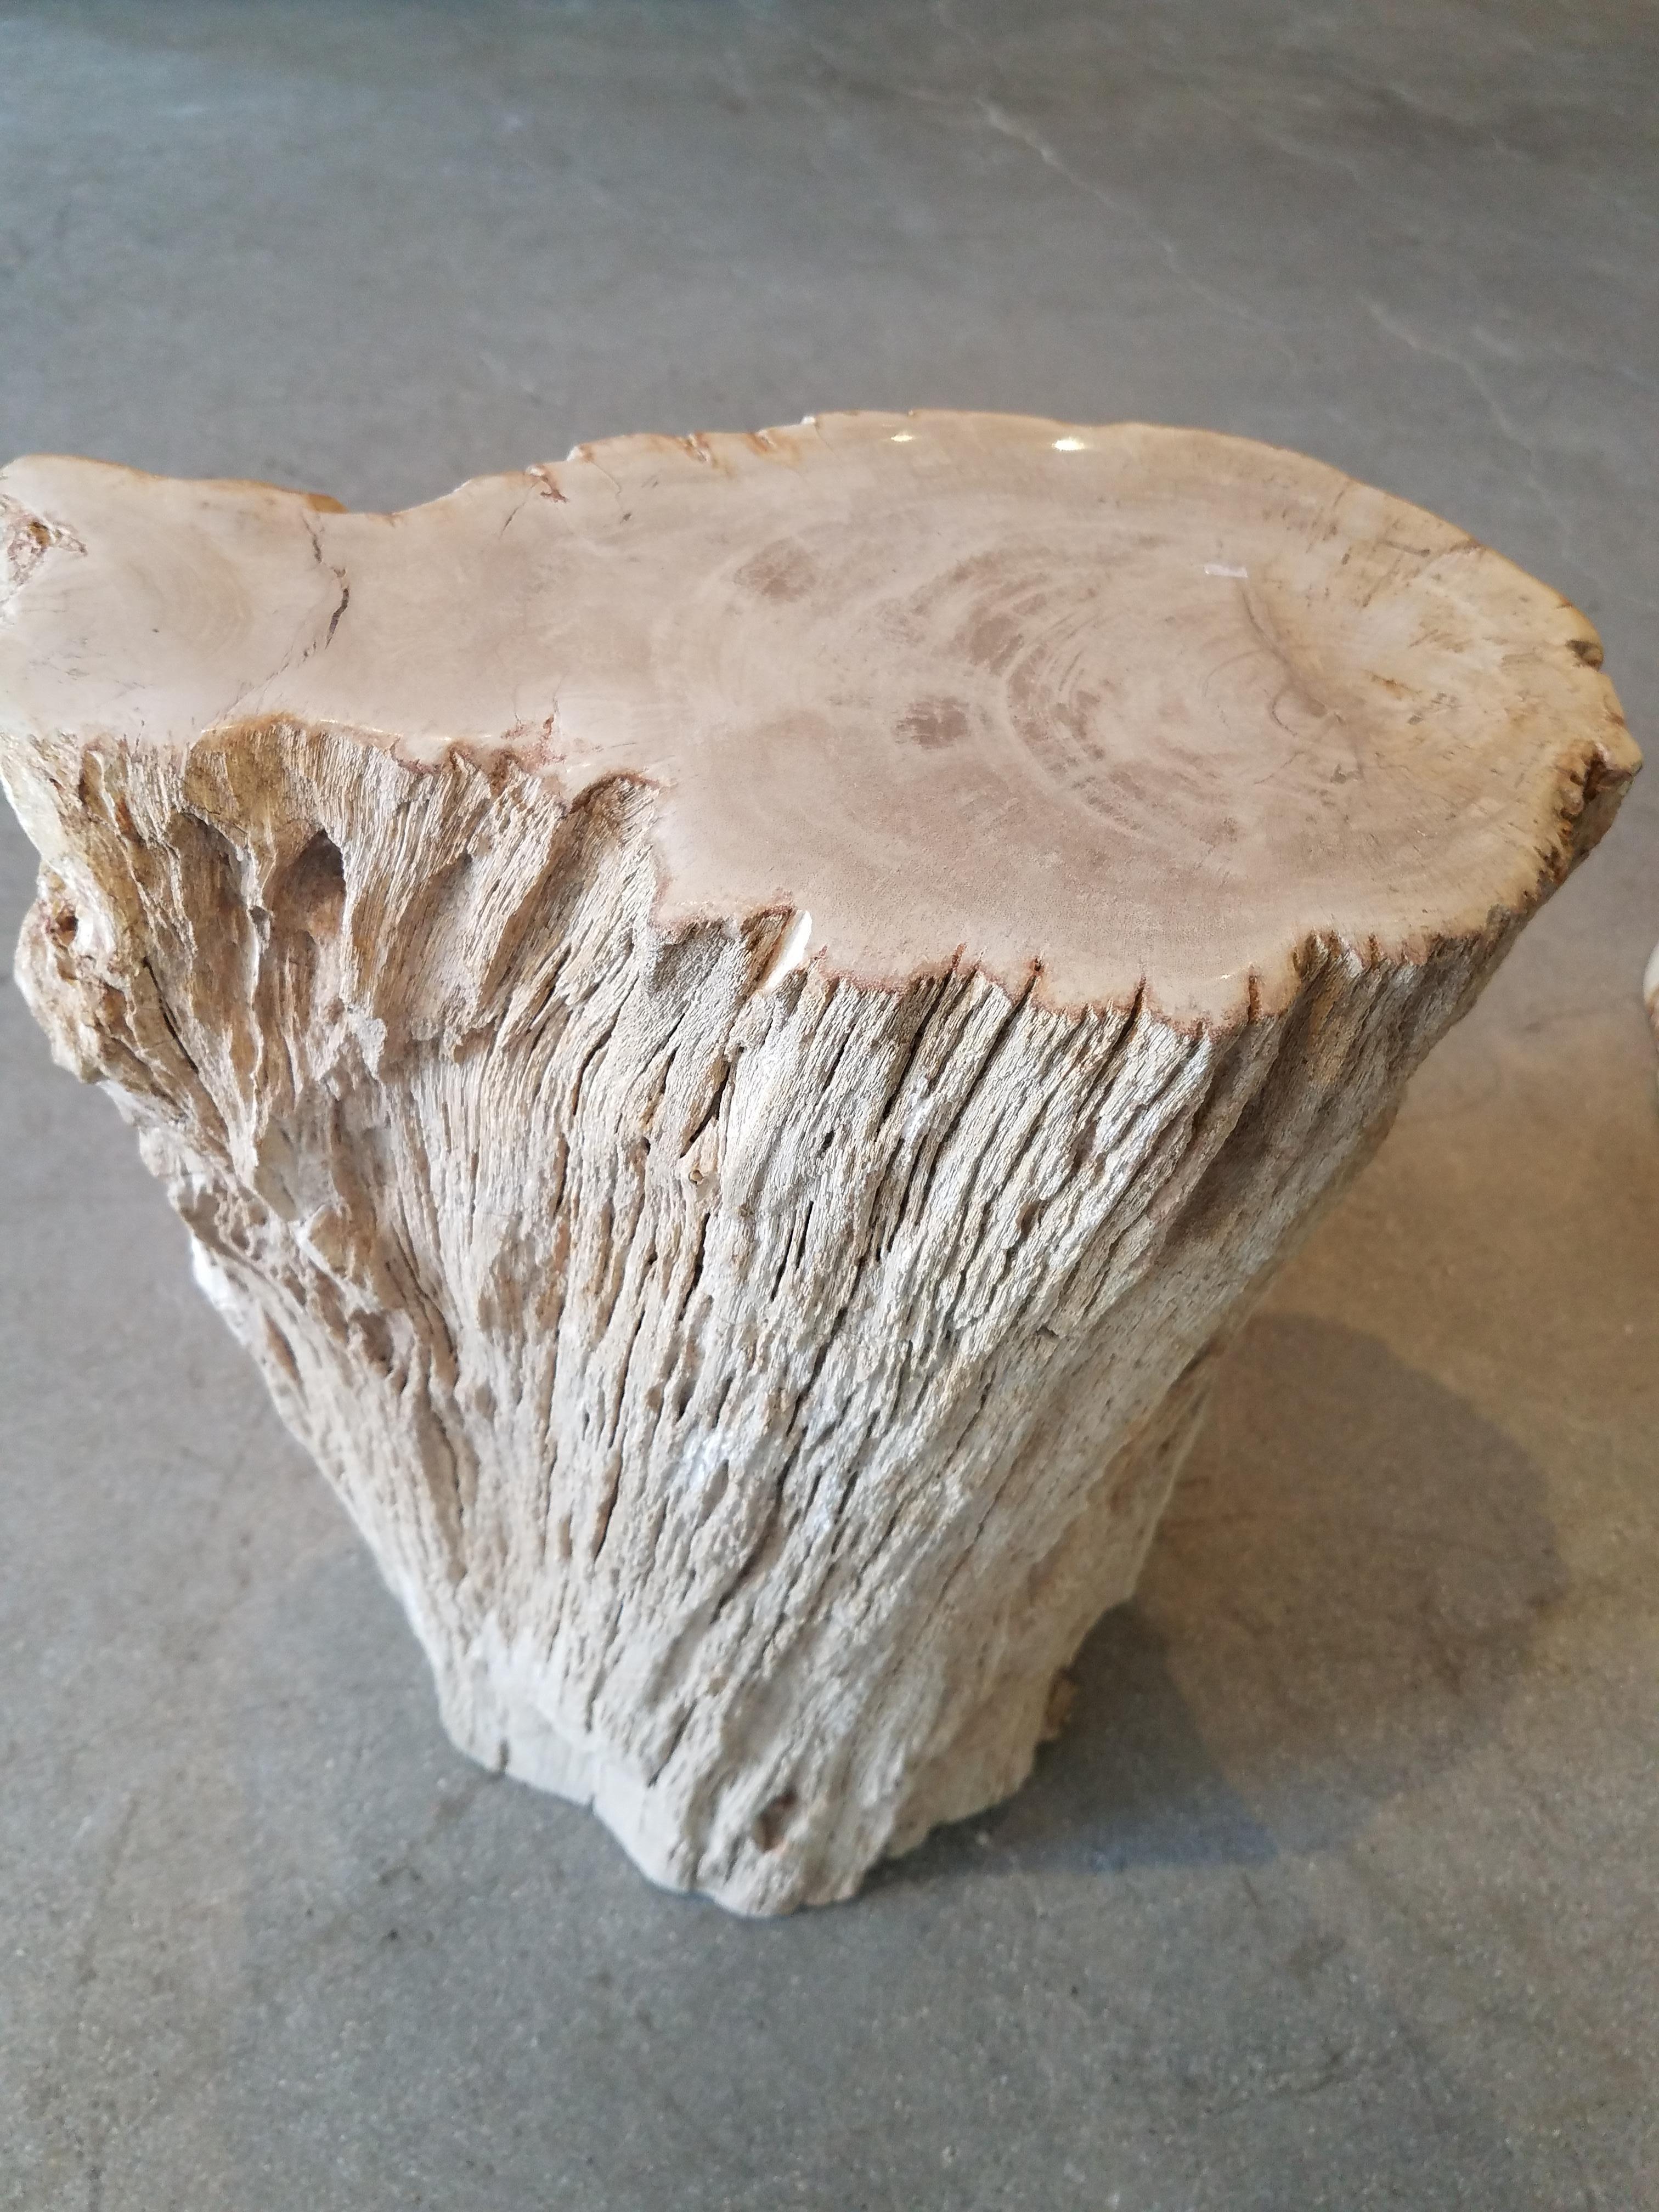 This beautiful piece of petrified wood has amazing likeness to a tree trunk with deep graining on the outside and even a piece where the wood has crystalized as seen in the detail photos. The color of ashen grey is wonderful on the outside and the